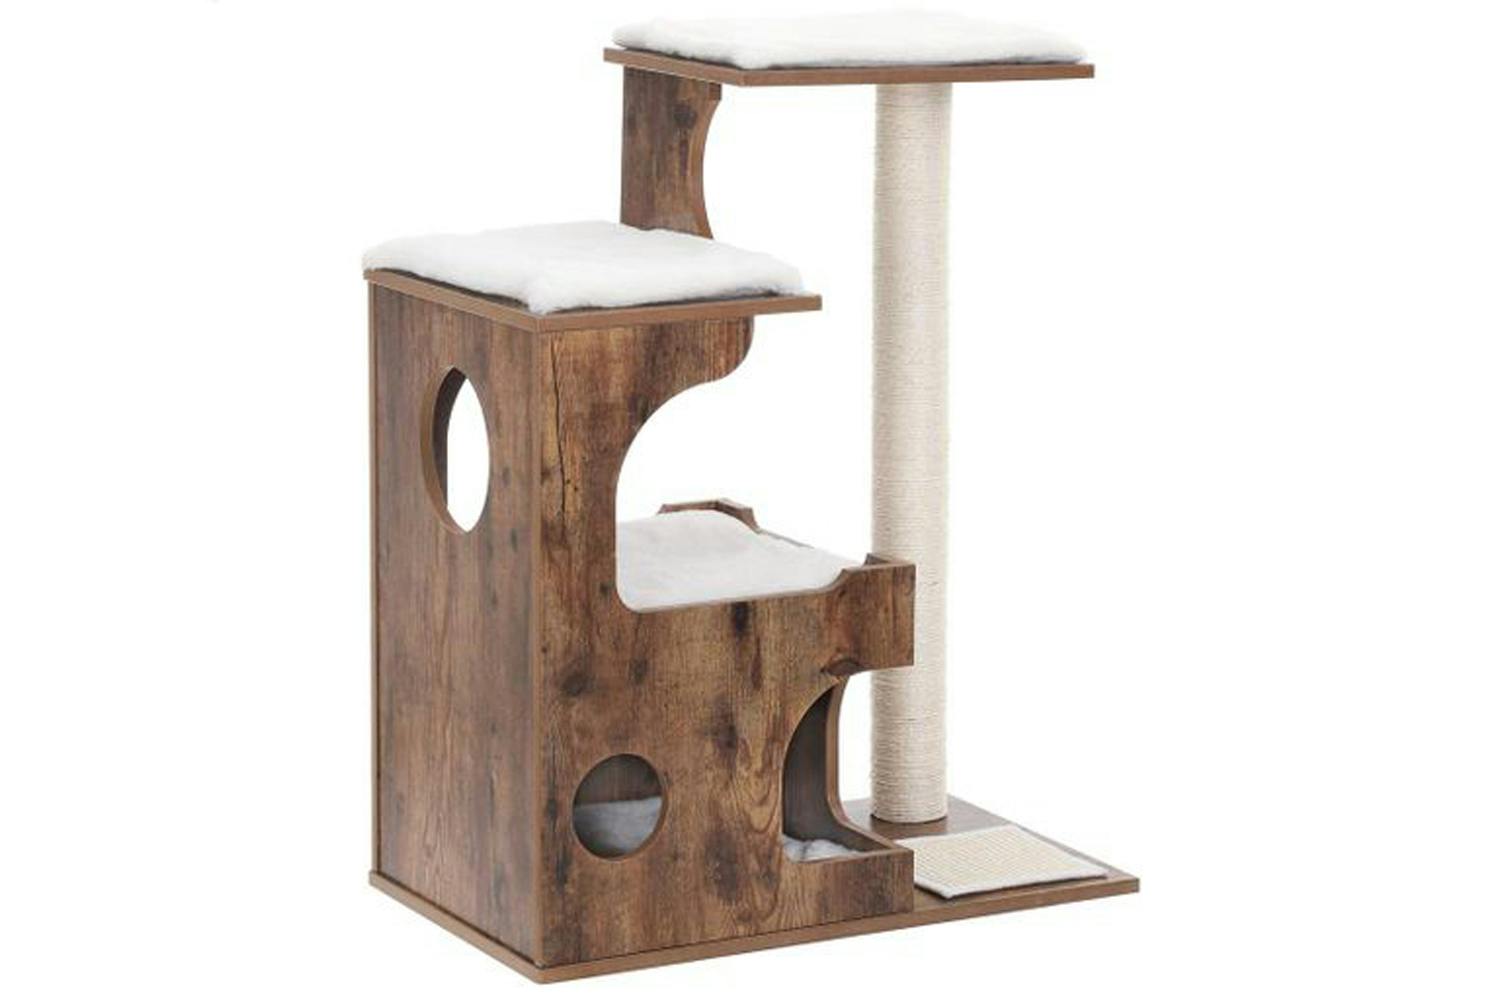 Feandrea 3 Beds Cat Tree | Rustic Brown & White